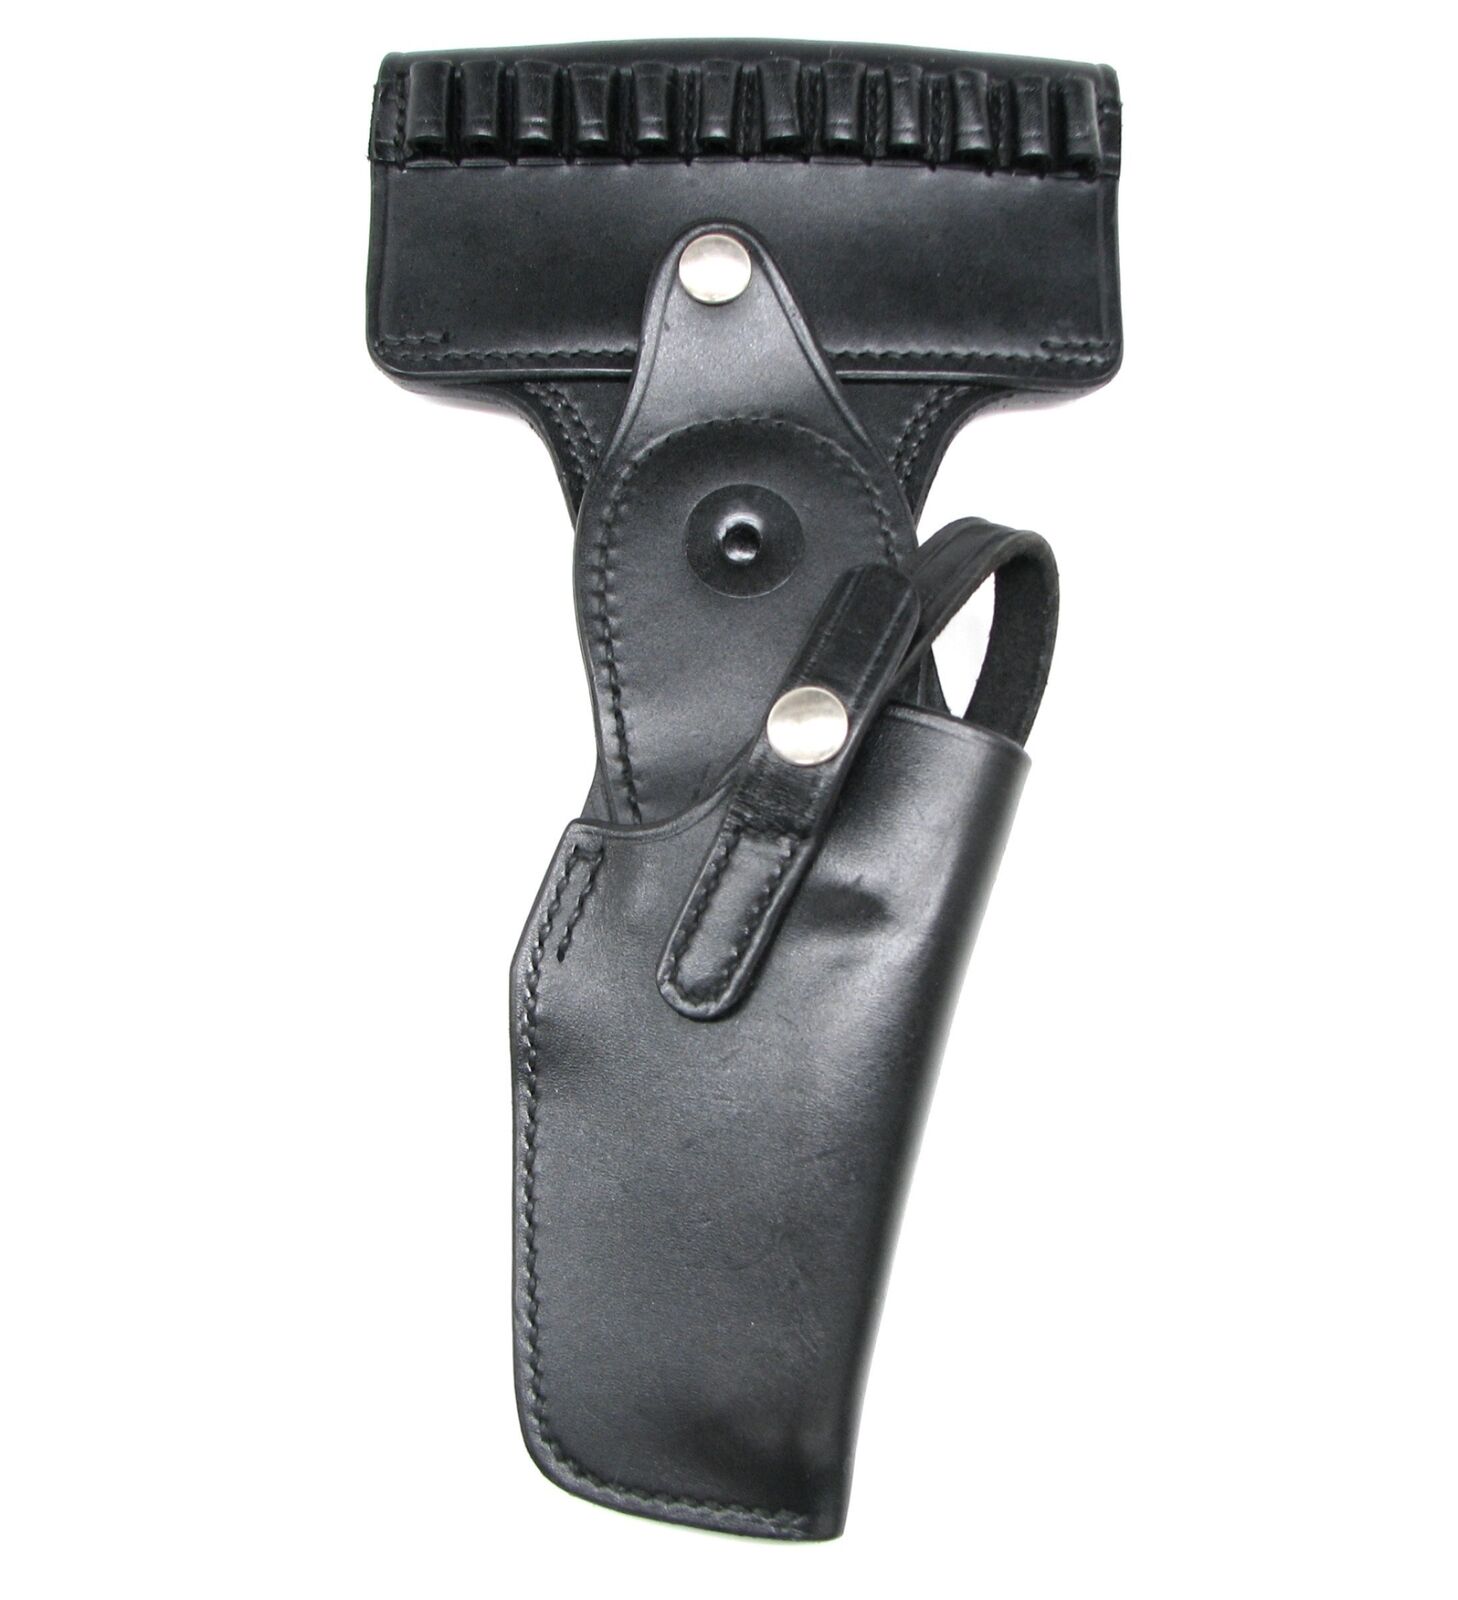 Swivel Holster fits 4-inch Revolvers including Smith & Wesson and Colt 